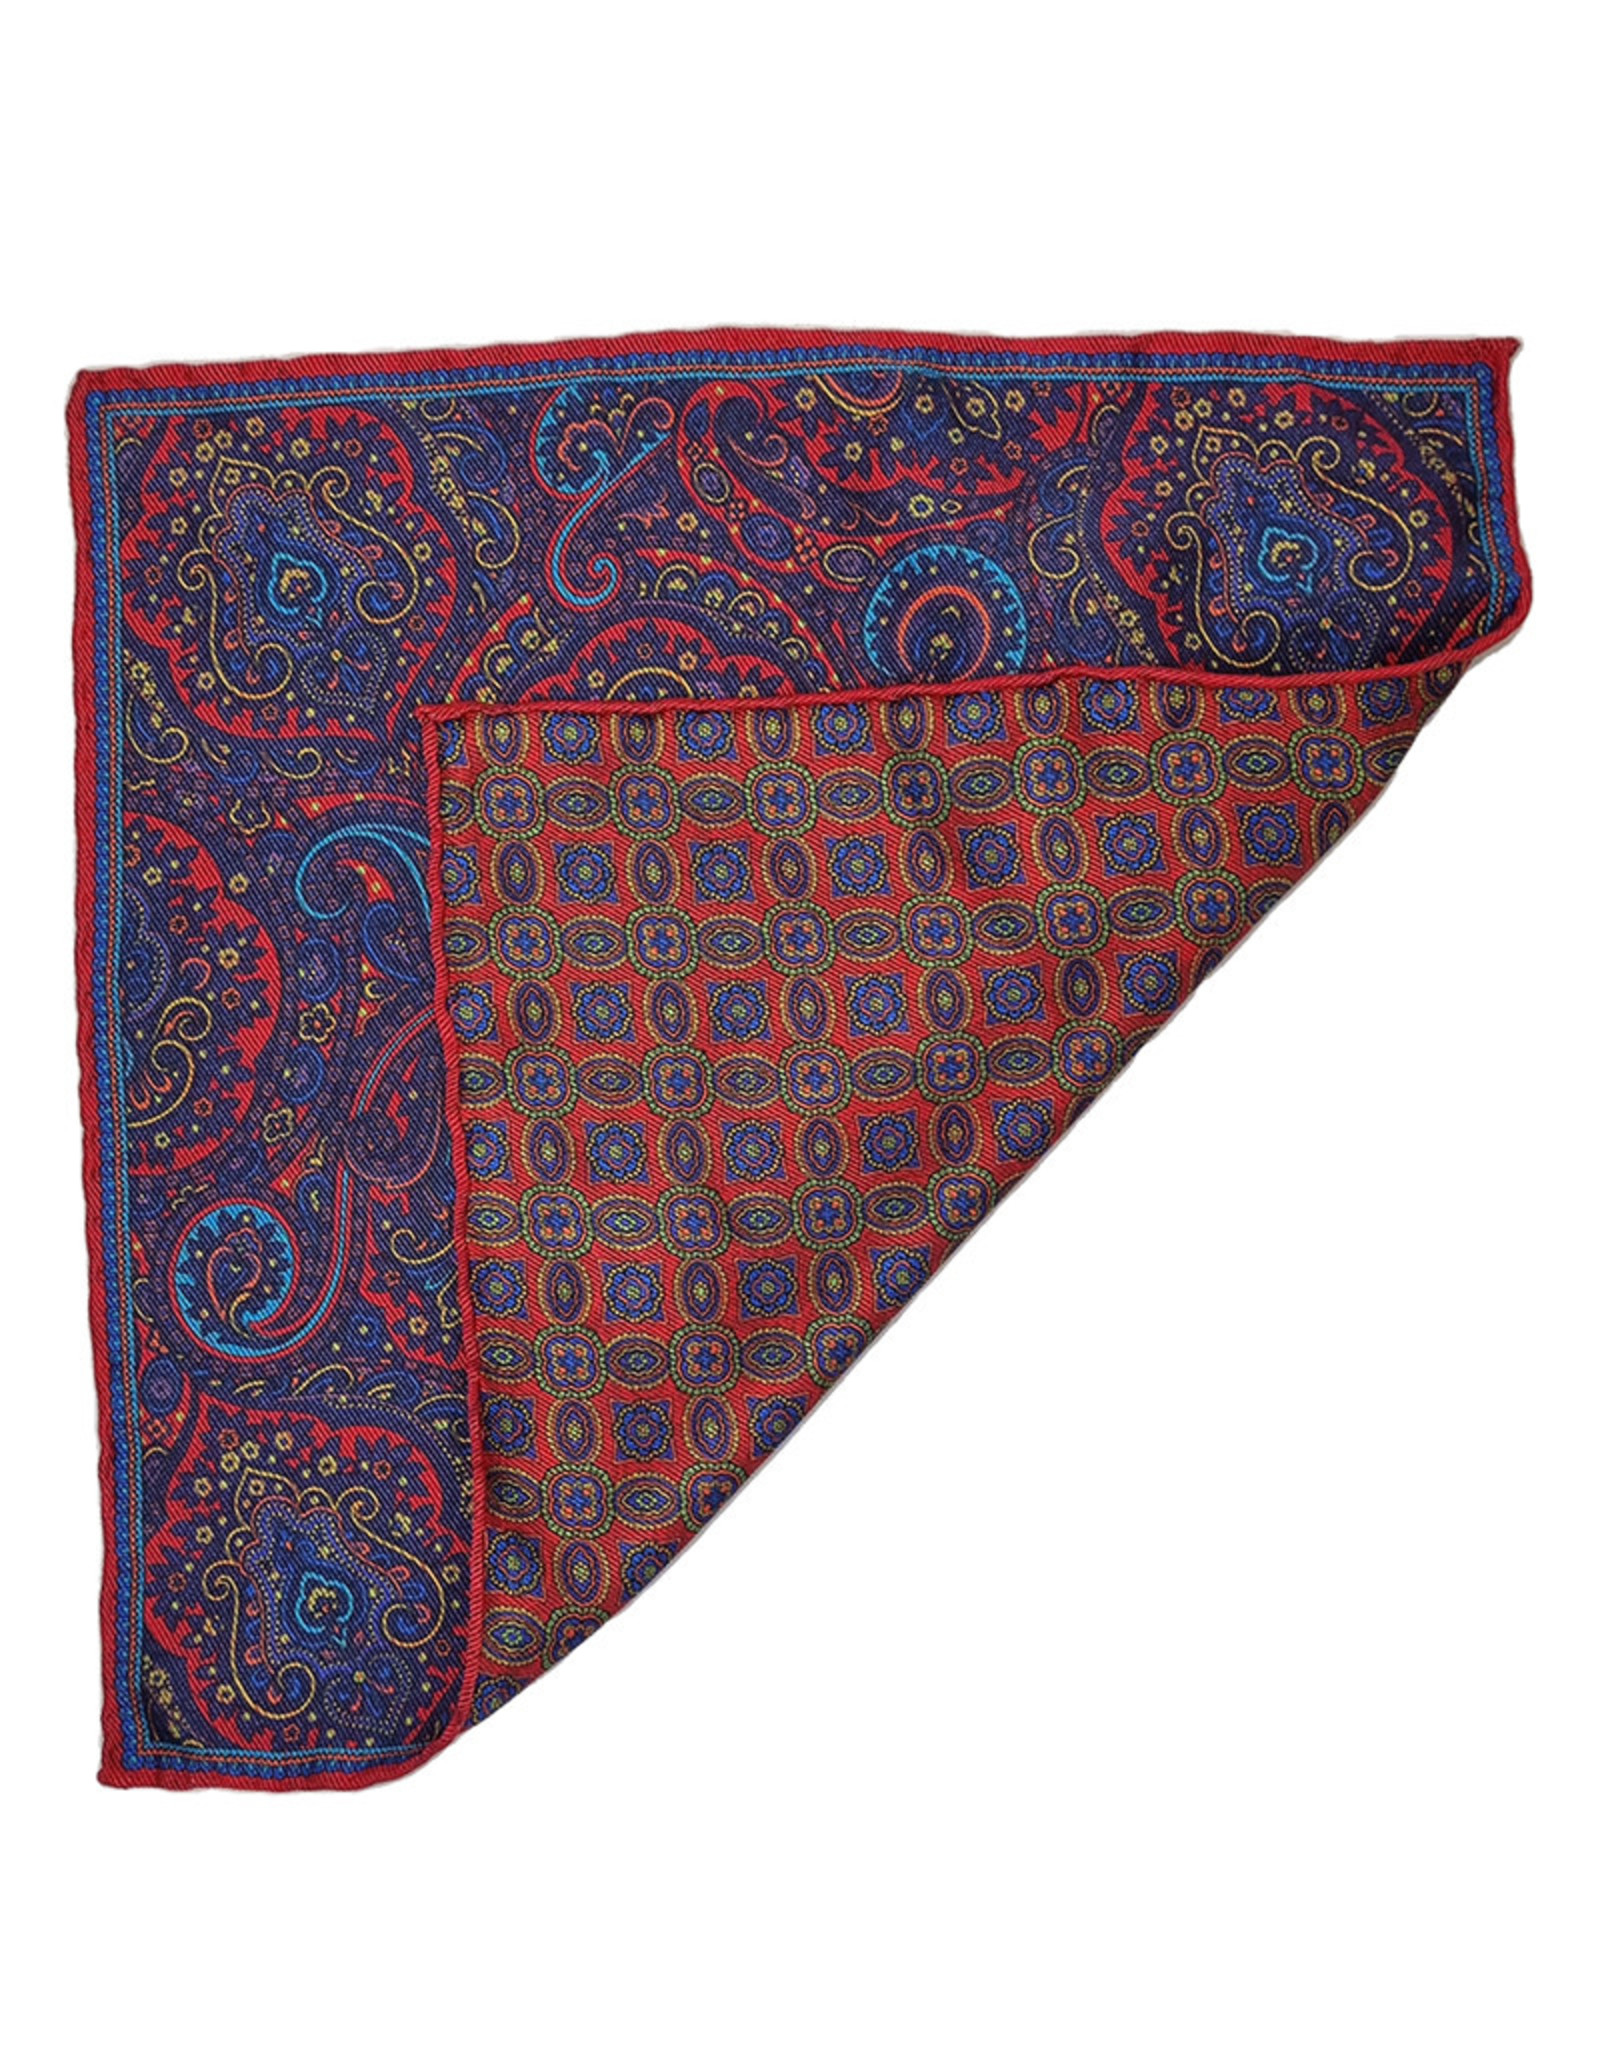 Calabrese Calabrese pocket square flantasy red